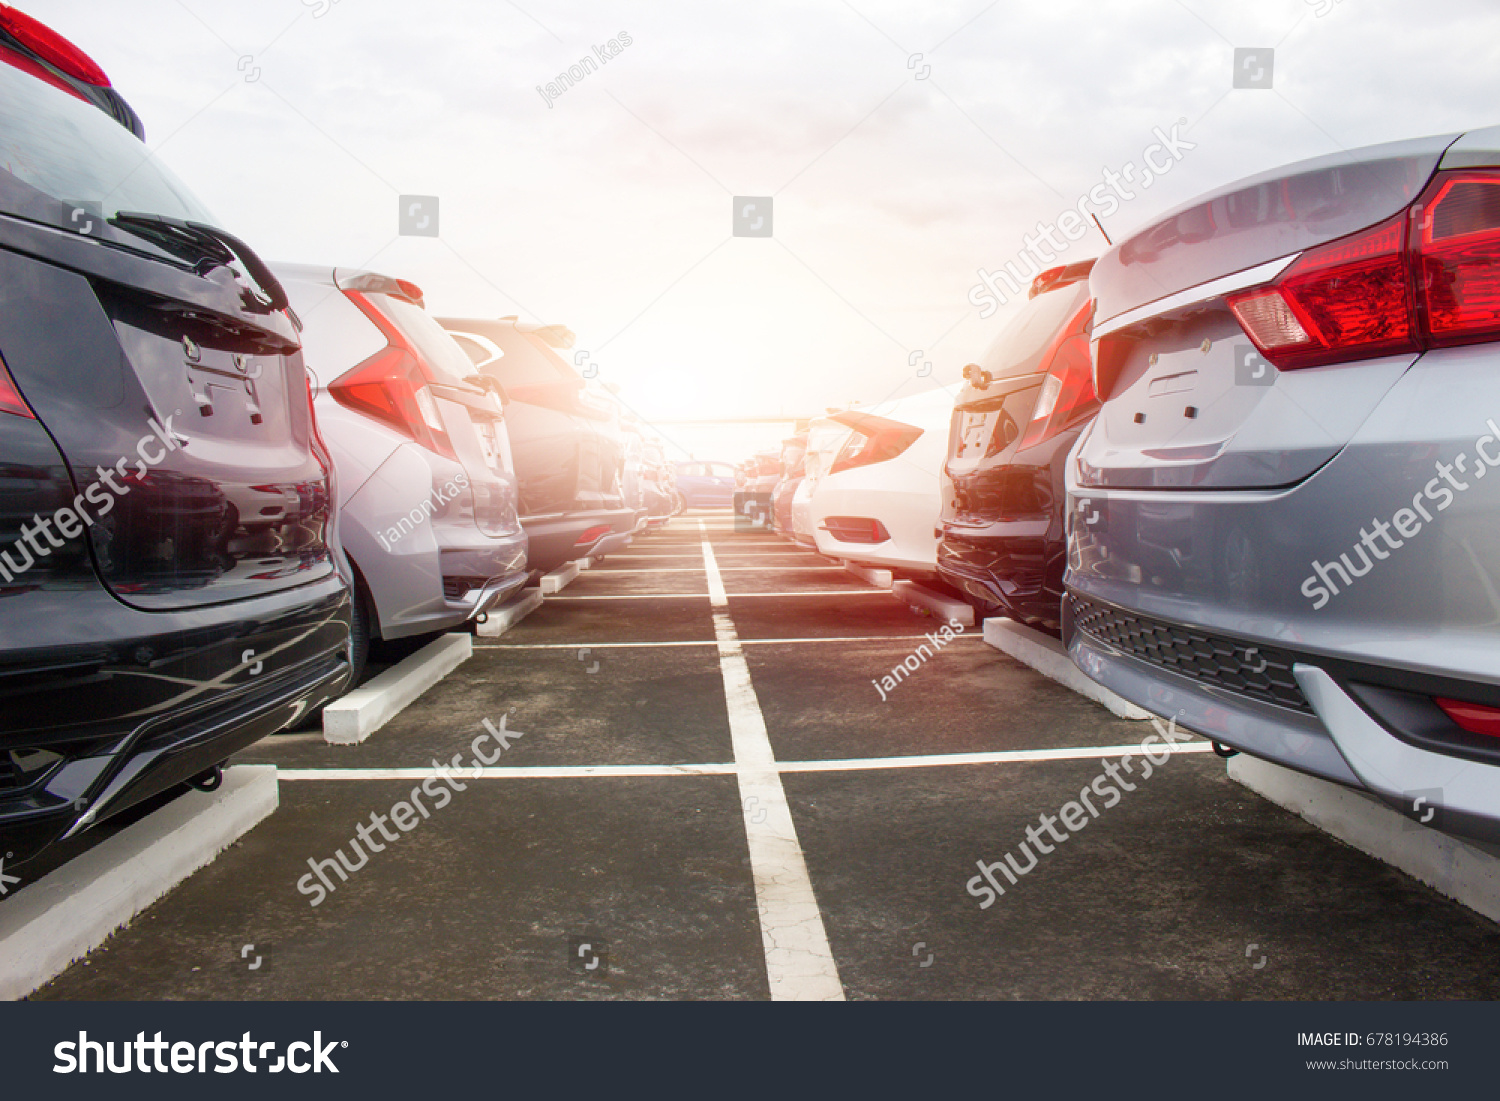 A row of new cars parked at a car dealership stock #678194386